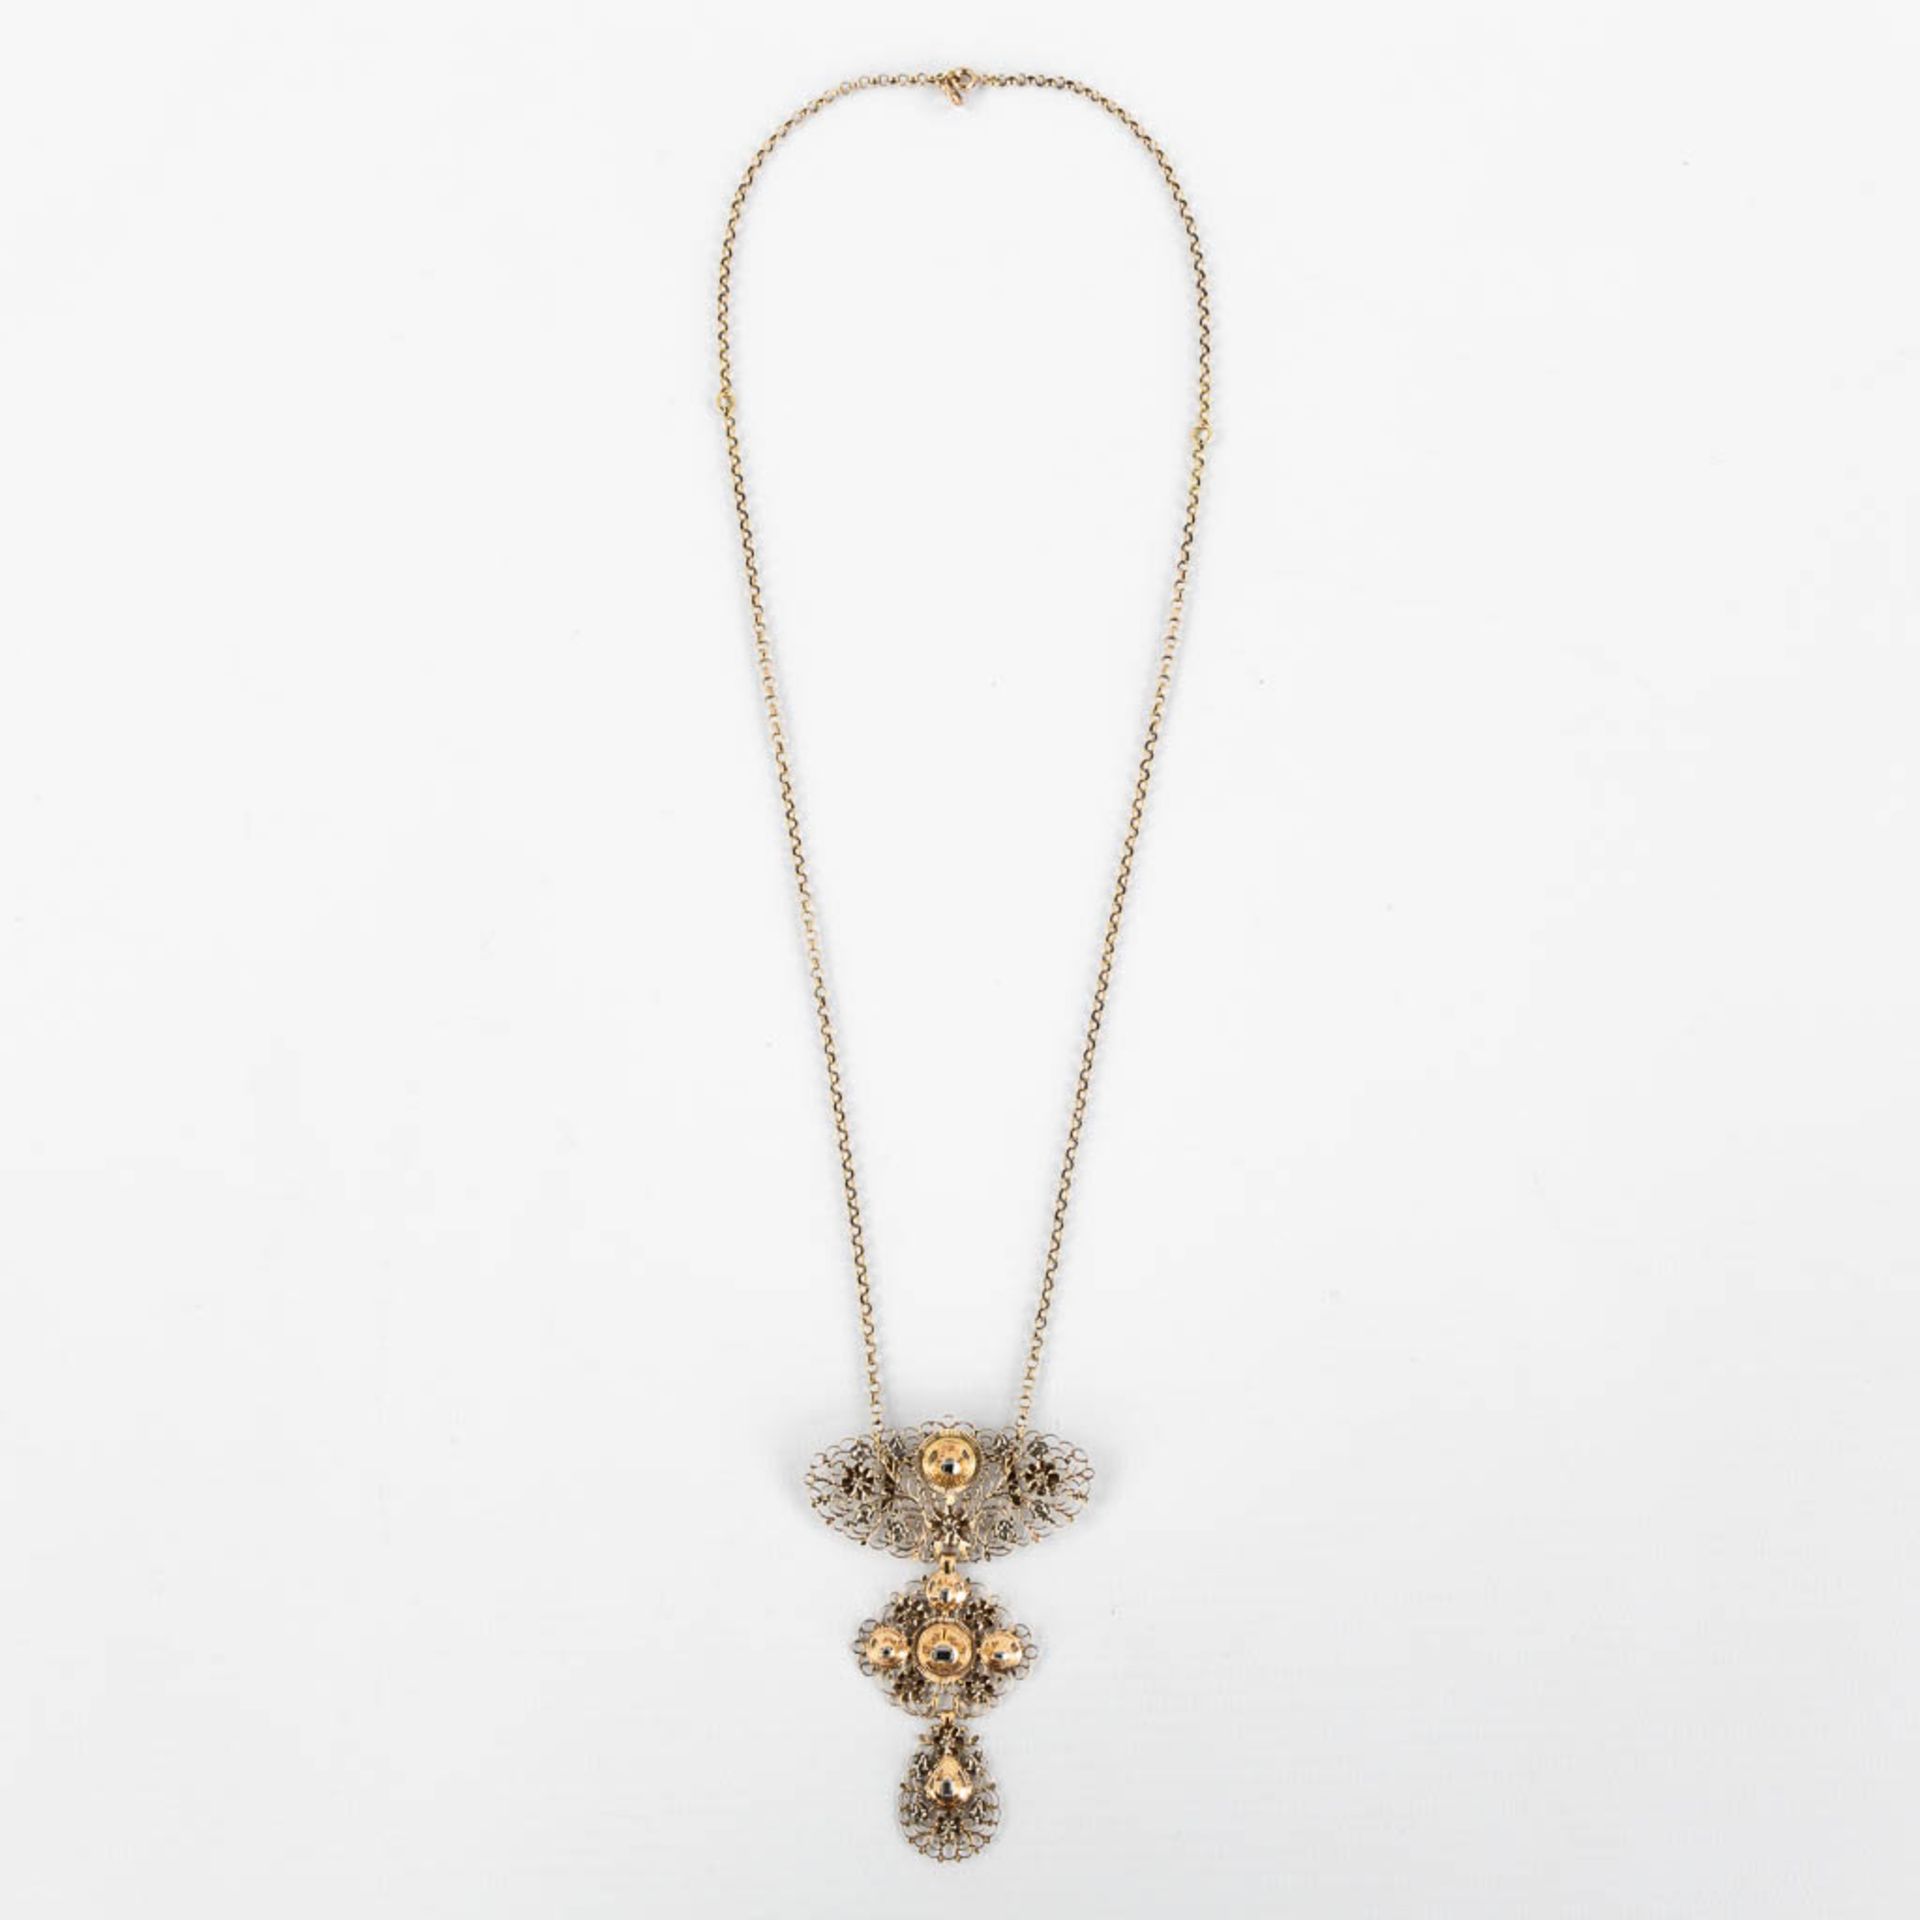 An antique pendant, 18kt yellow gold with old-cut diamonds. 19th C. (H:7,8 cm) - Image 3 of 6